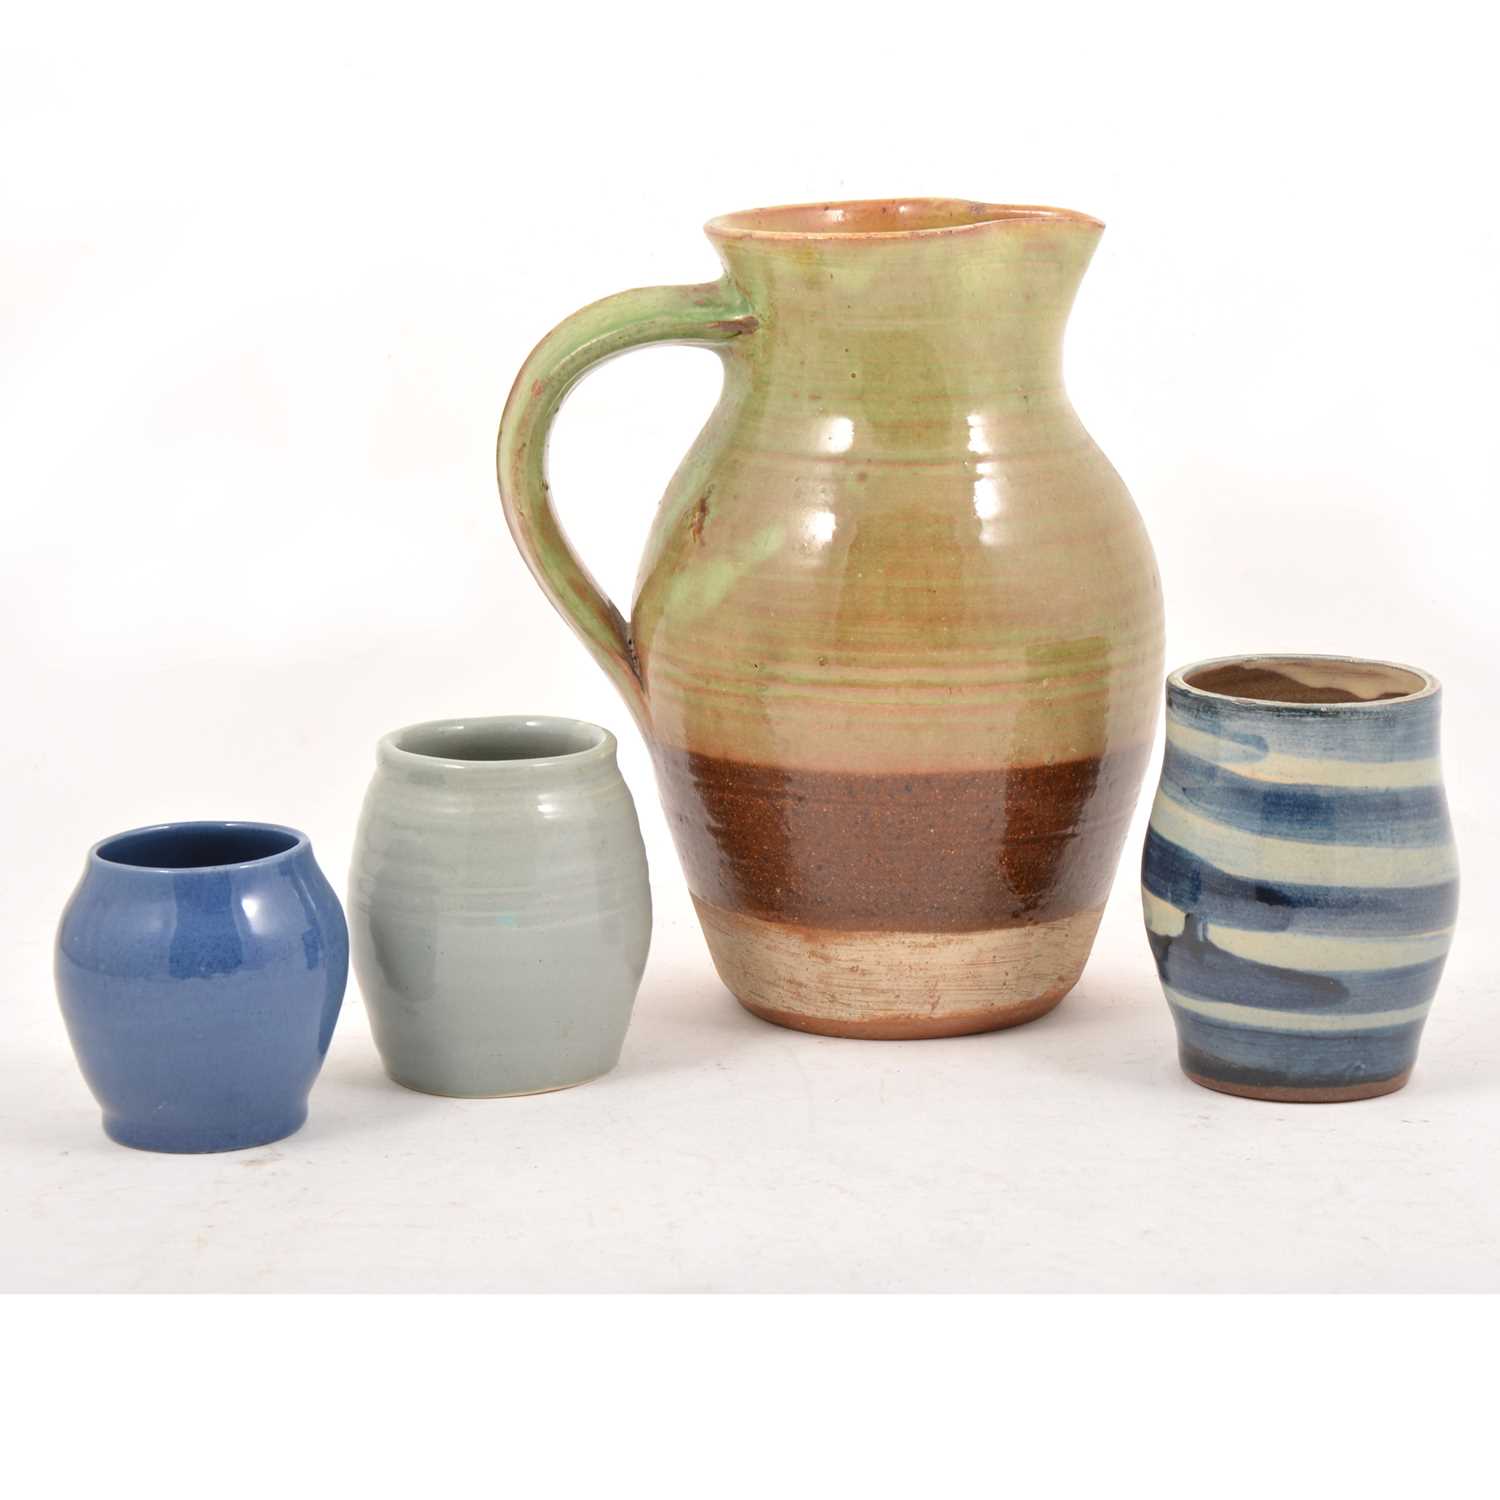 Lot 55 - Sidney Tustin for Winchcombe Pottery stoneware jug and other ware